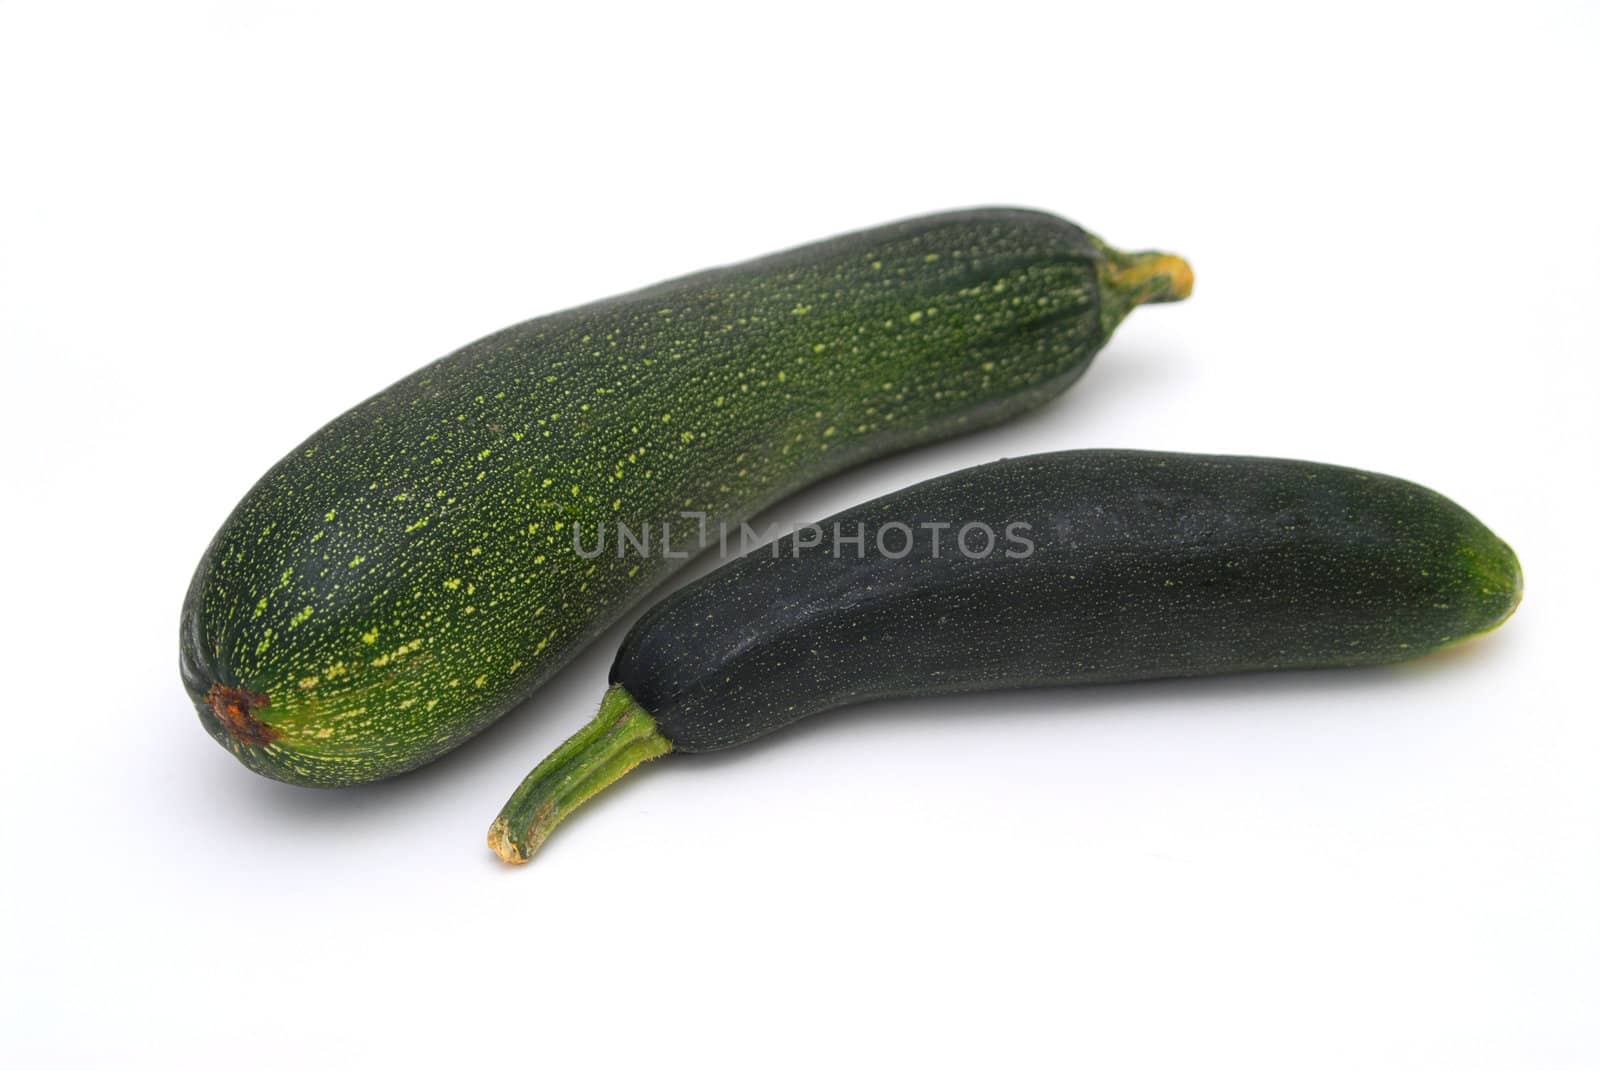 Two courgettes on the white background